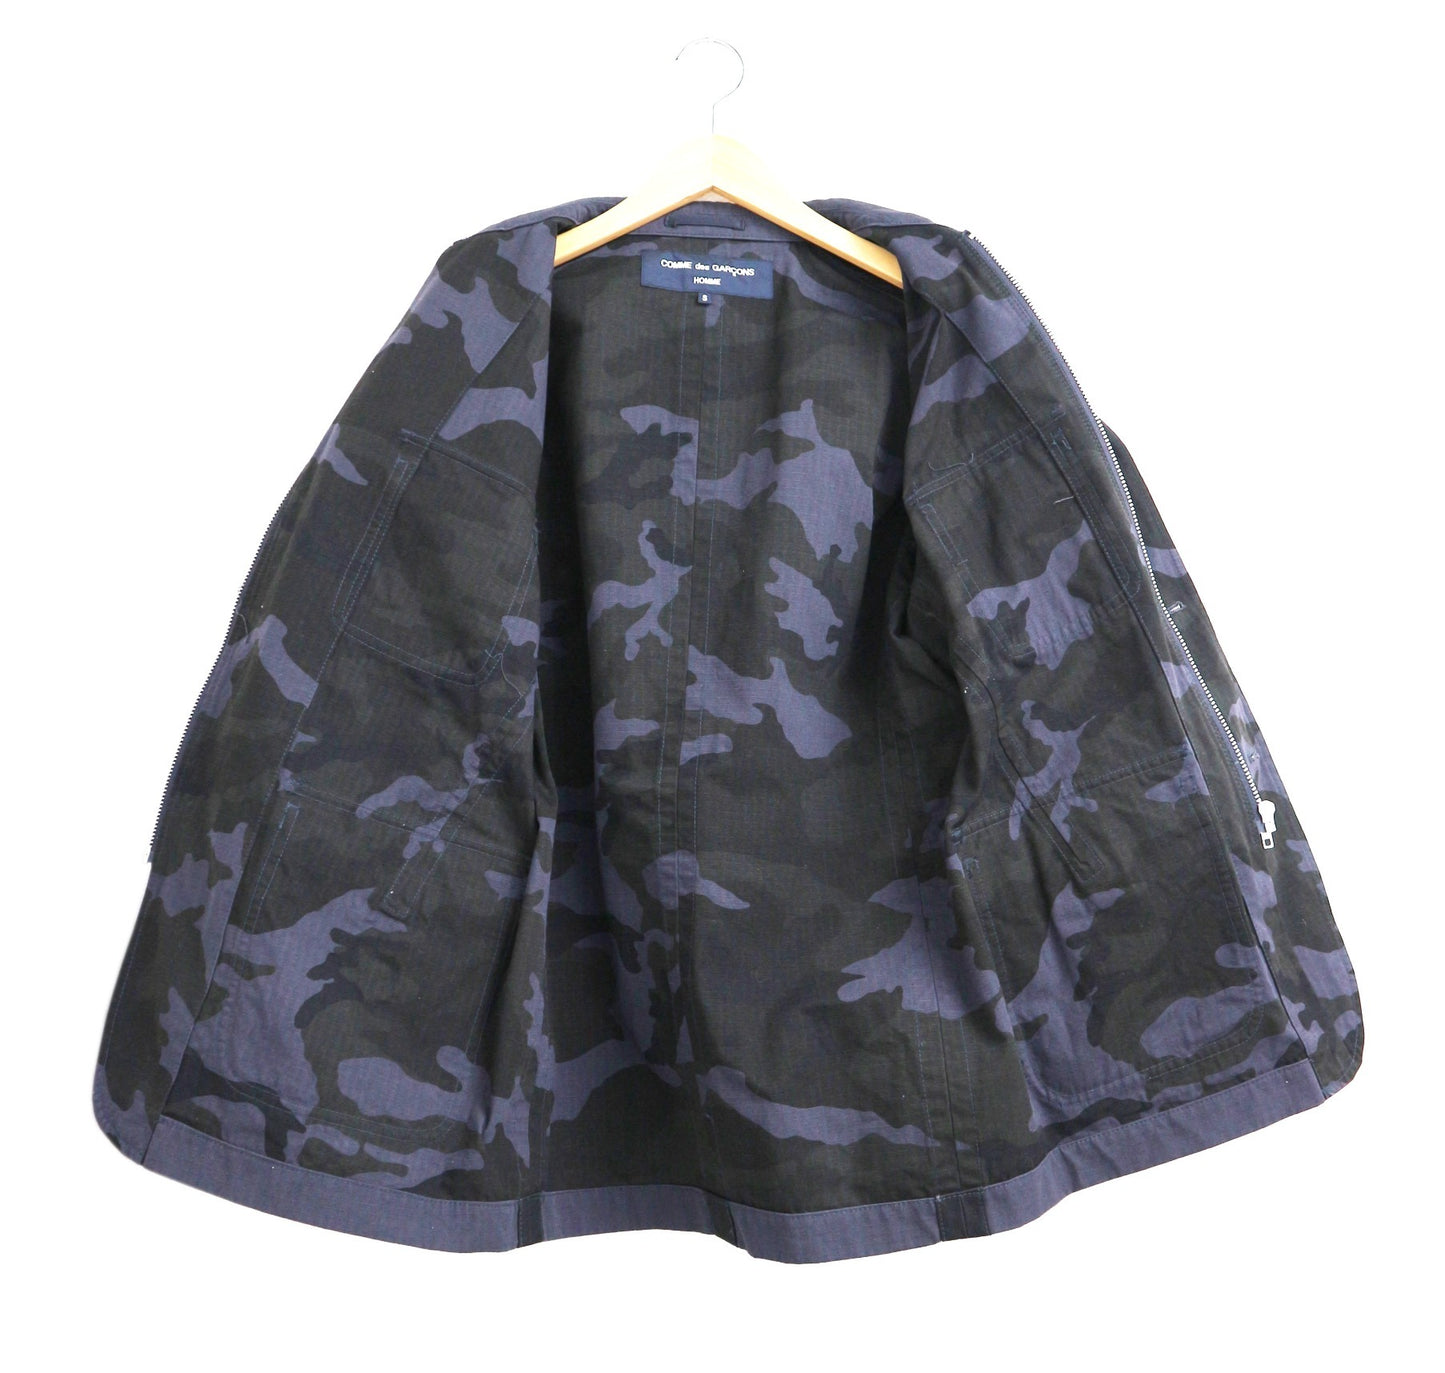 Comme des Garcons Homme Ripstop Camouflage Pattern Jacket HE-J018